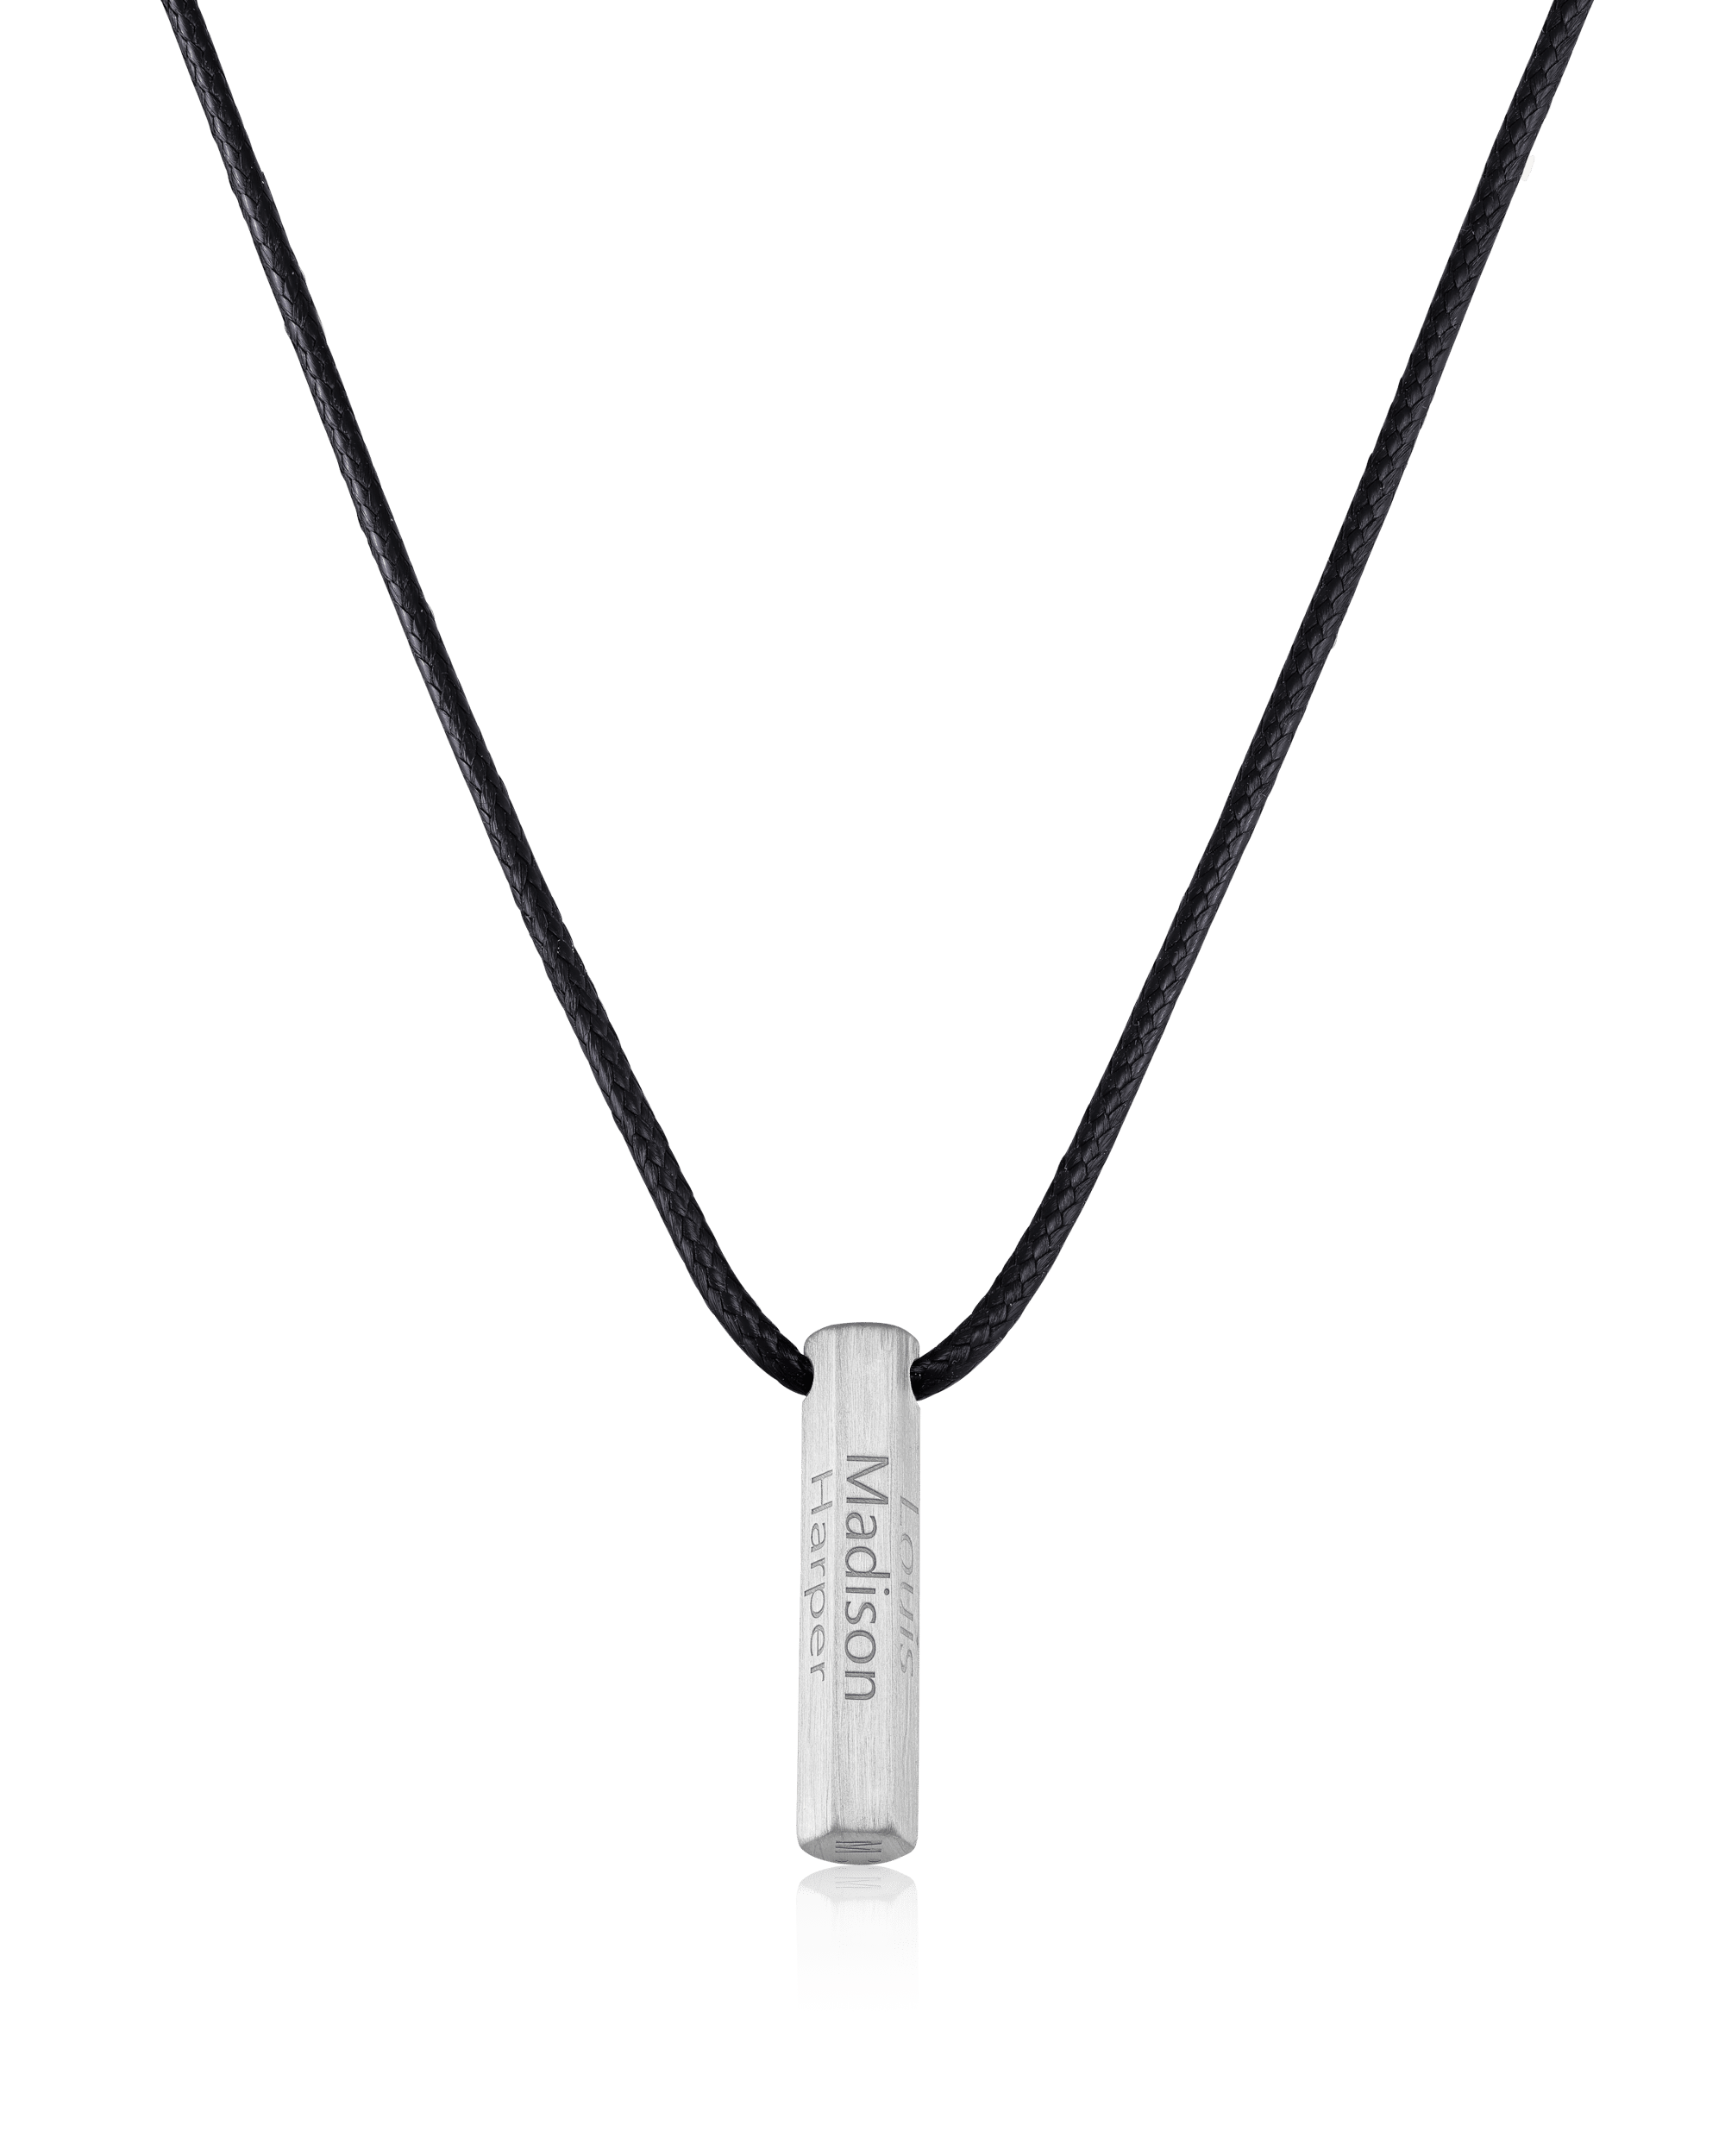 Shopping Dust Rectangle and Spiral 3D Bar Pendant Hip Hop Simple Chain  Trusted Bar Necklace Black Silver Stainless Steel Pendant Price in India -  Buy Shopping Dust Rectangle and Spiral 3D Bar